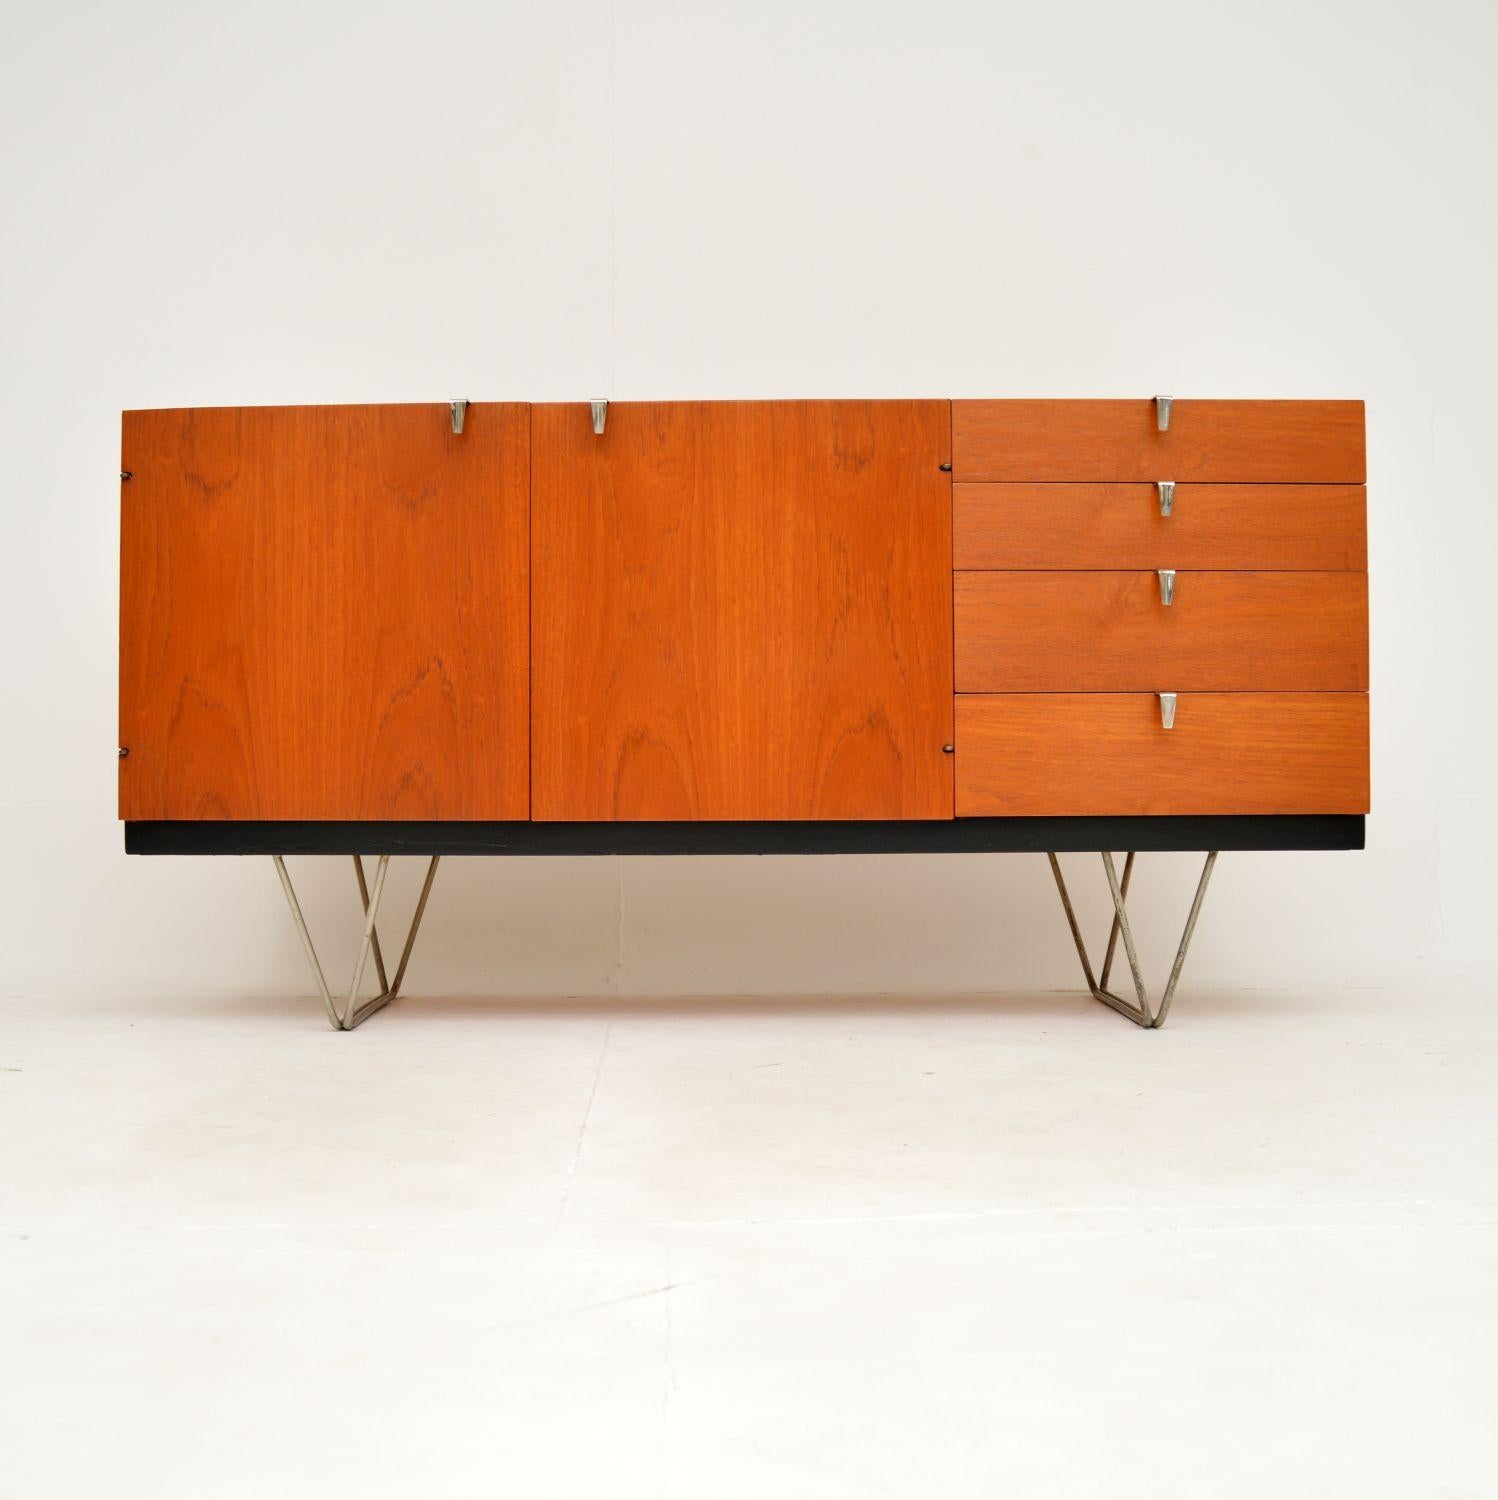 A fantastic original vintage S range sideboard in teak, designed by John and Sylvia Reid for Stag. This was made in England in the 1960’s.

An extremely stylish an iconic design, instantly recognisable from its lovely hair pin steel legs. These were